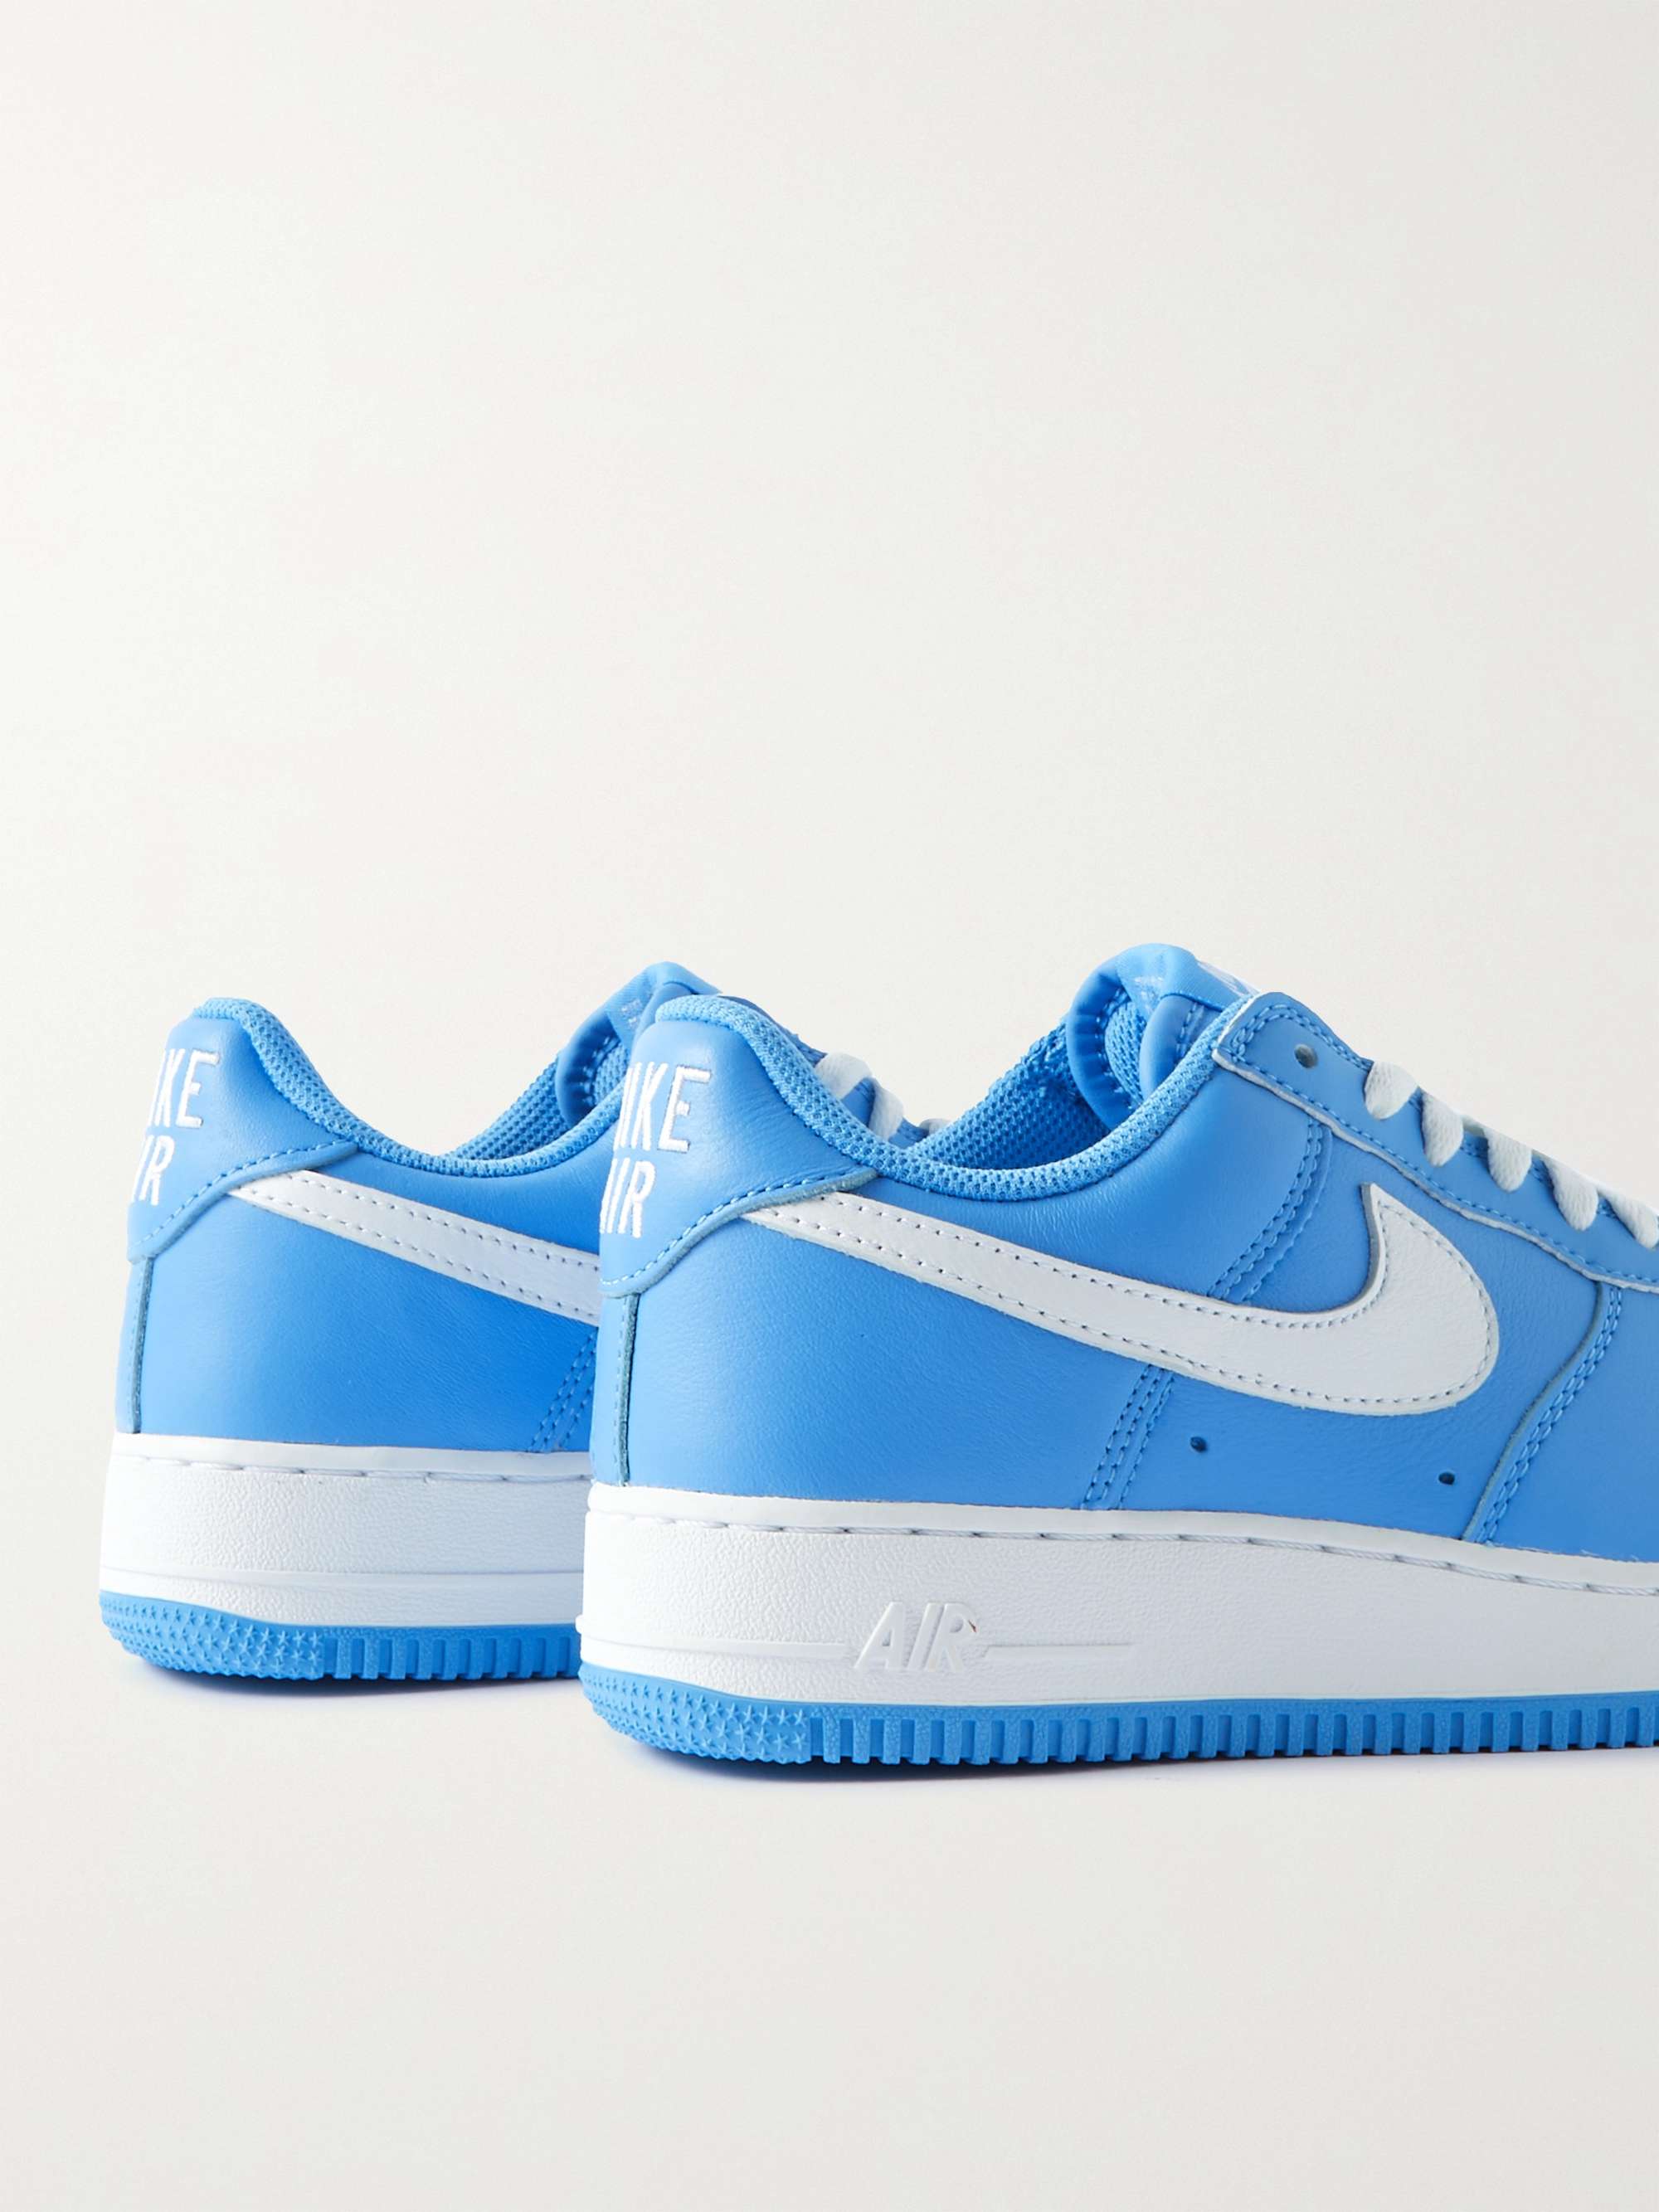 Sky blue Air Force 1 Low Leather Sneakers | NIKE | MR PORTER